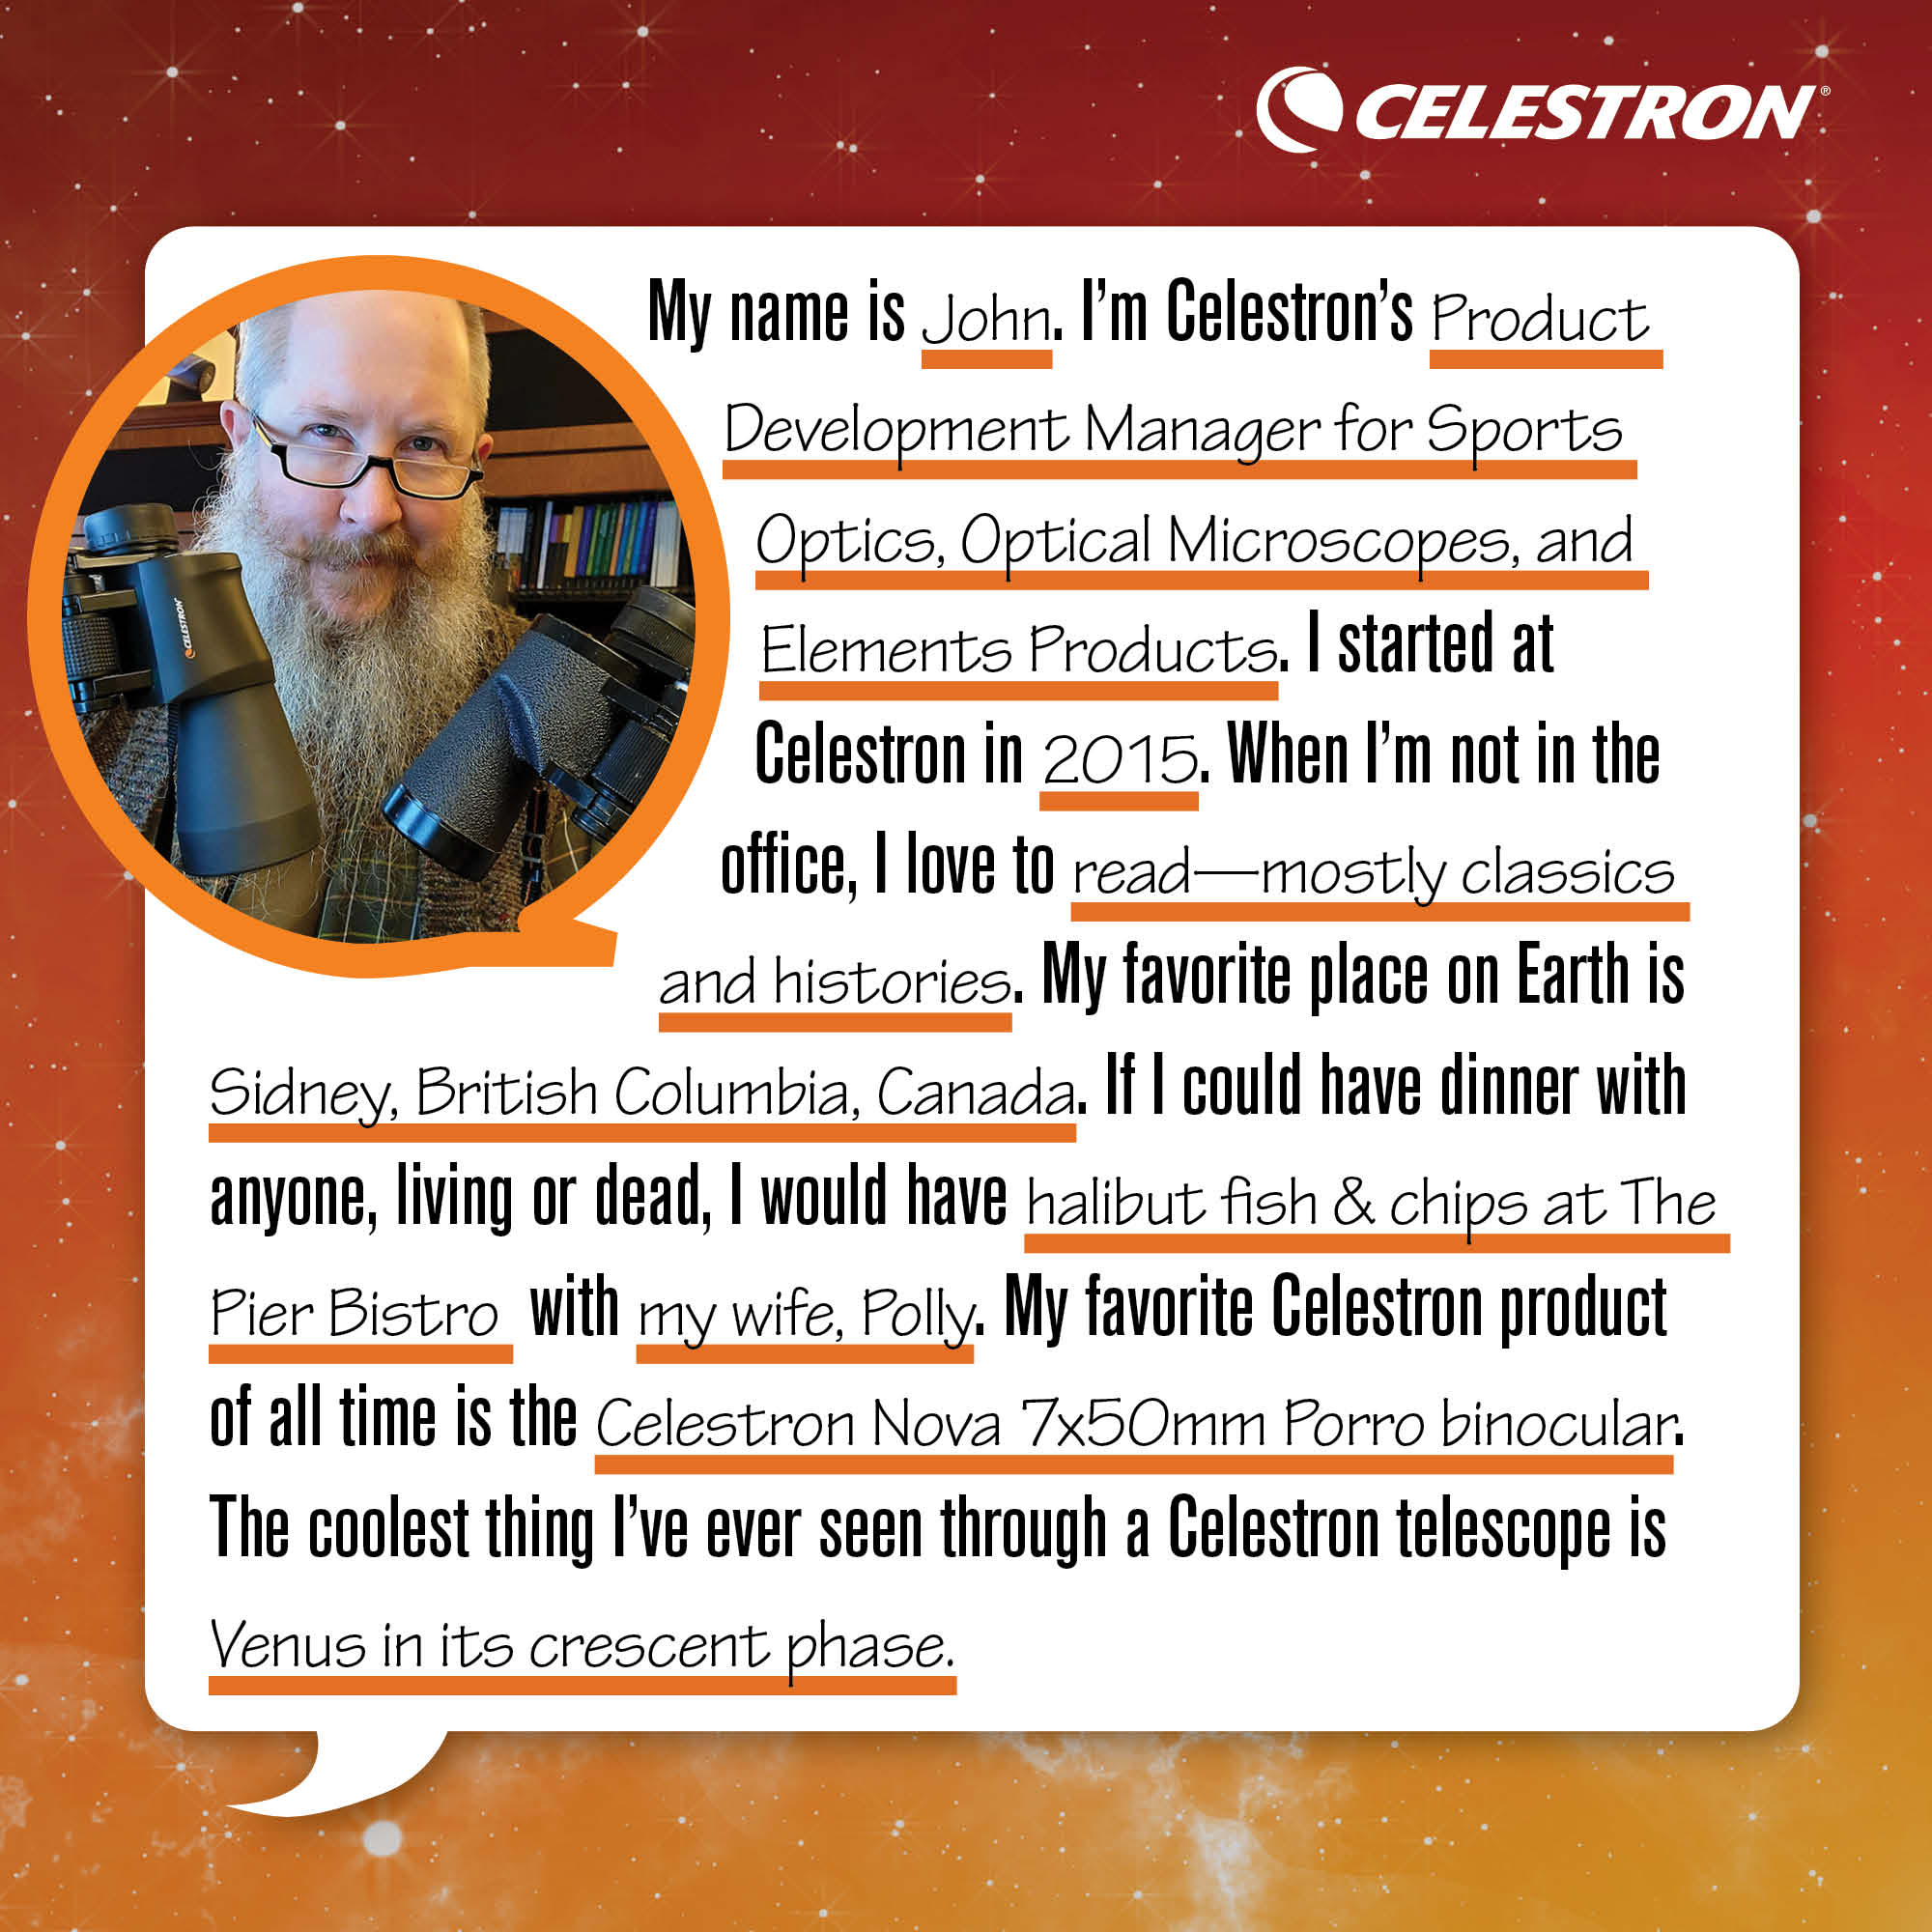 My name is John. I'm Celestron's Product Development Manager for Sports Optics, Optical Microscopes, and Elements products. I started at Celestron in 2015. When I'm not in the office, I love to read - mostly classics and histories.  My favorite place on Earth is Sidney, British Columbia, Canada. If I could have dinner with anyone, living or dead, I would have halibut fish and chips at The Pier Bistro with my wife, Polly. My favorite Celestron product of all time is the Celestron Nova 7x50mm Porro binocular. The coolest thing I've ever seen through a Celestron telescope is Venus in its crescent phase.